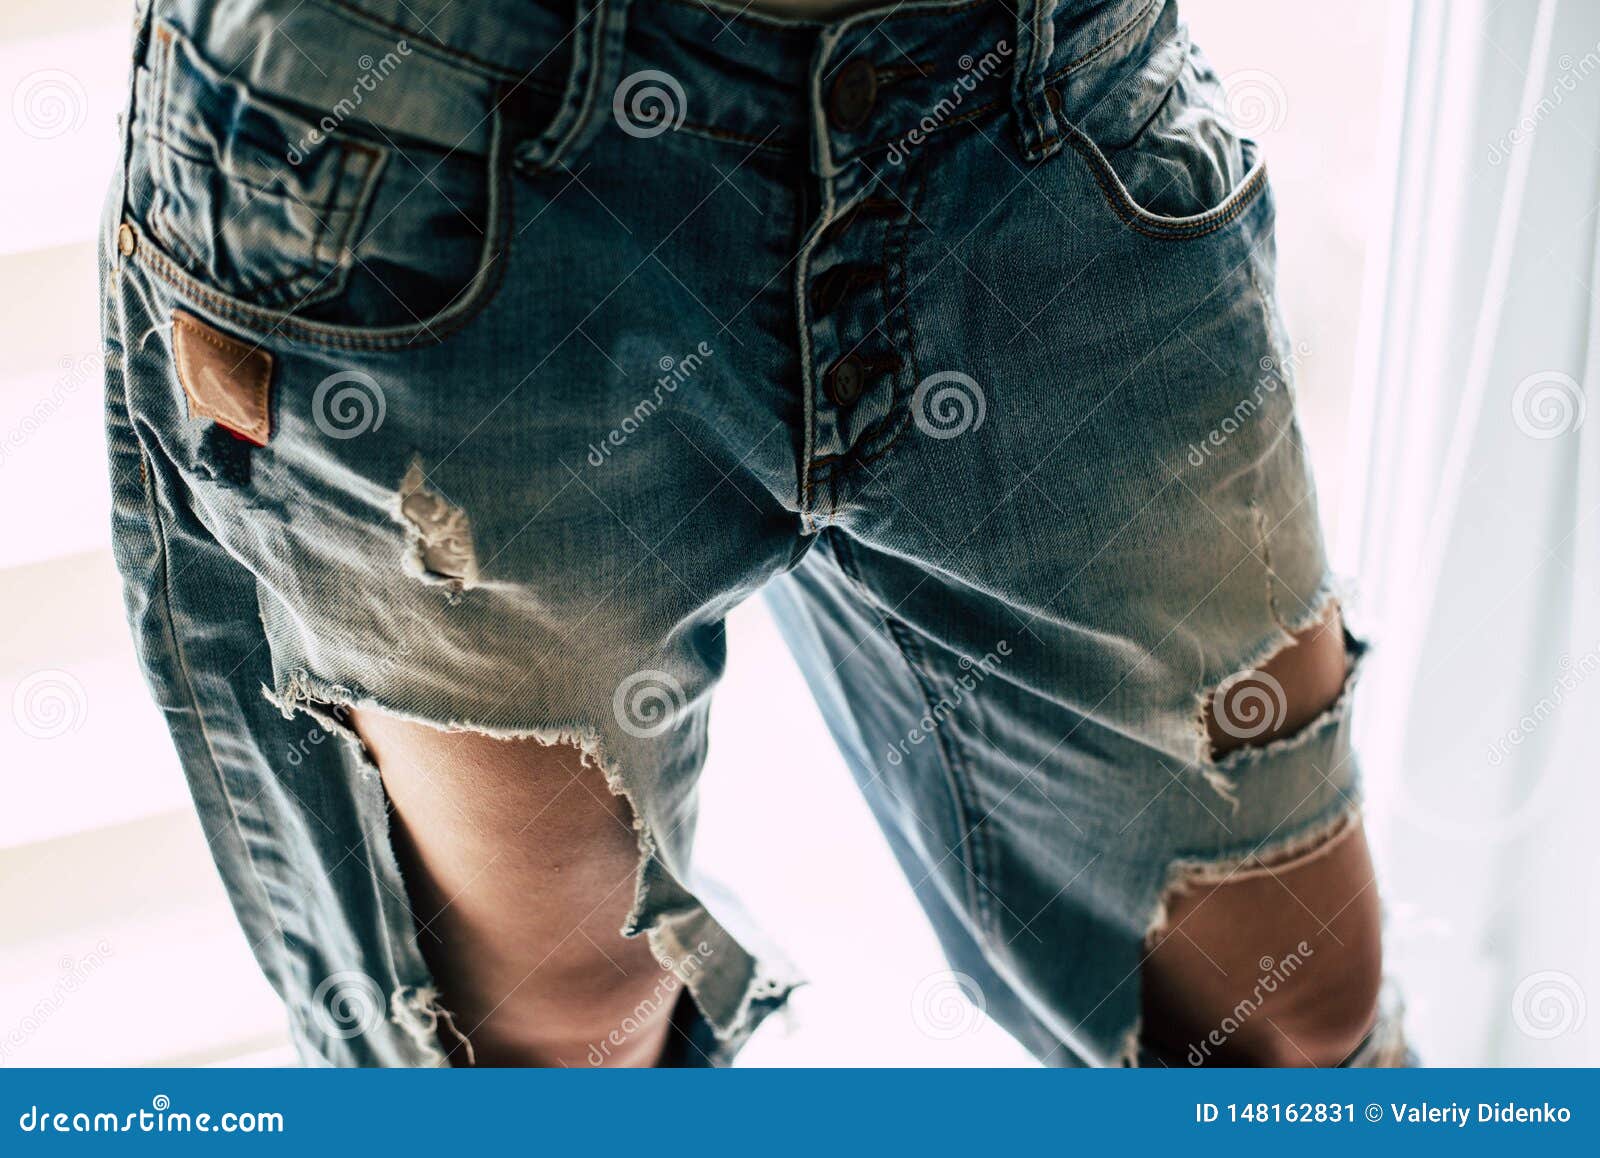 Torn jeans on the girl stock image. Image of glamour - 148162831